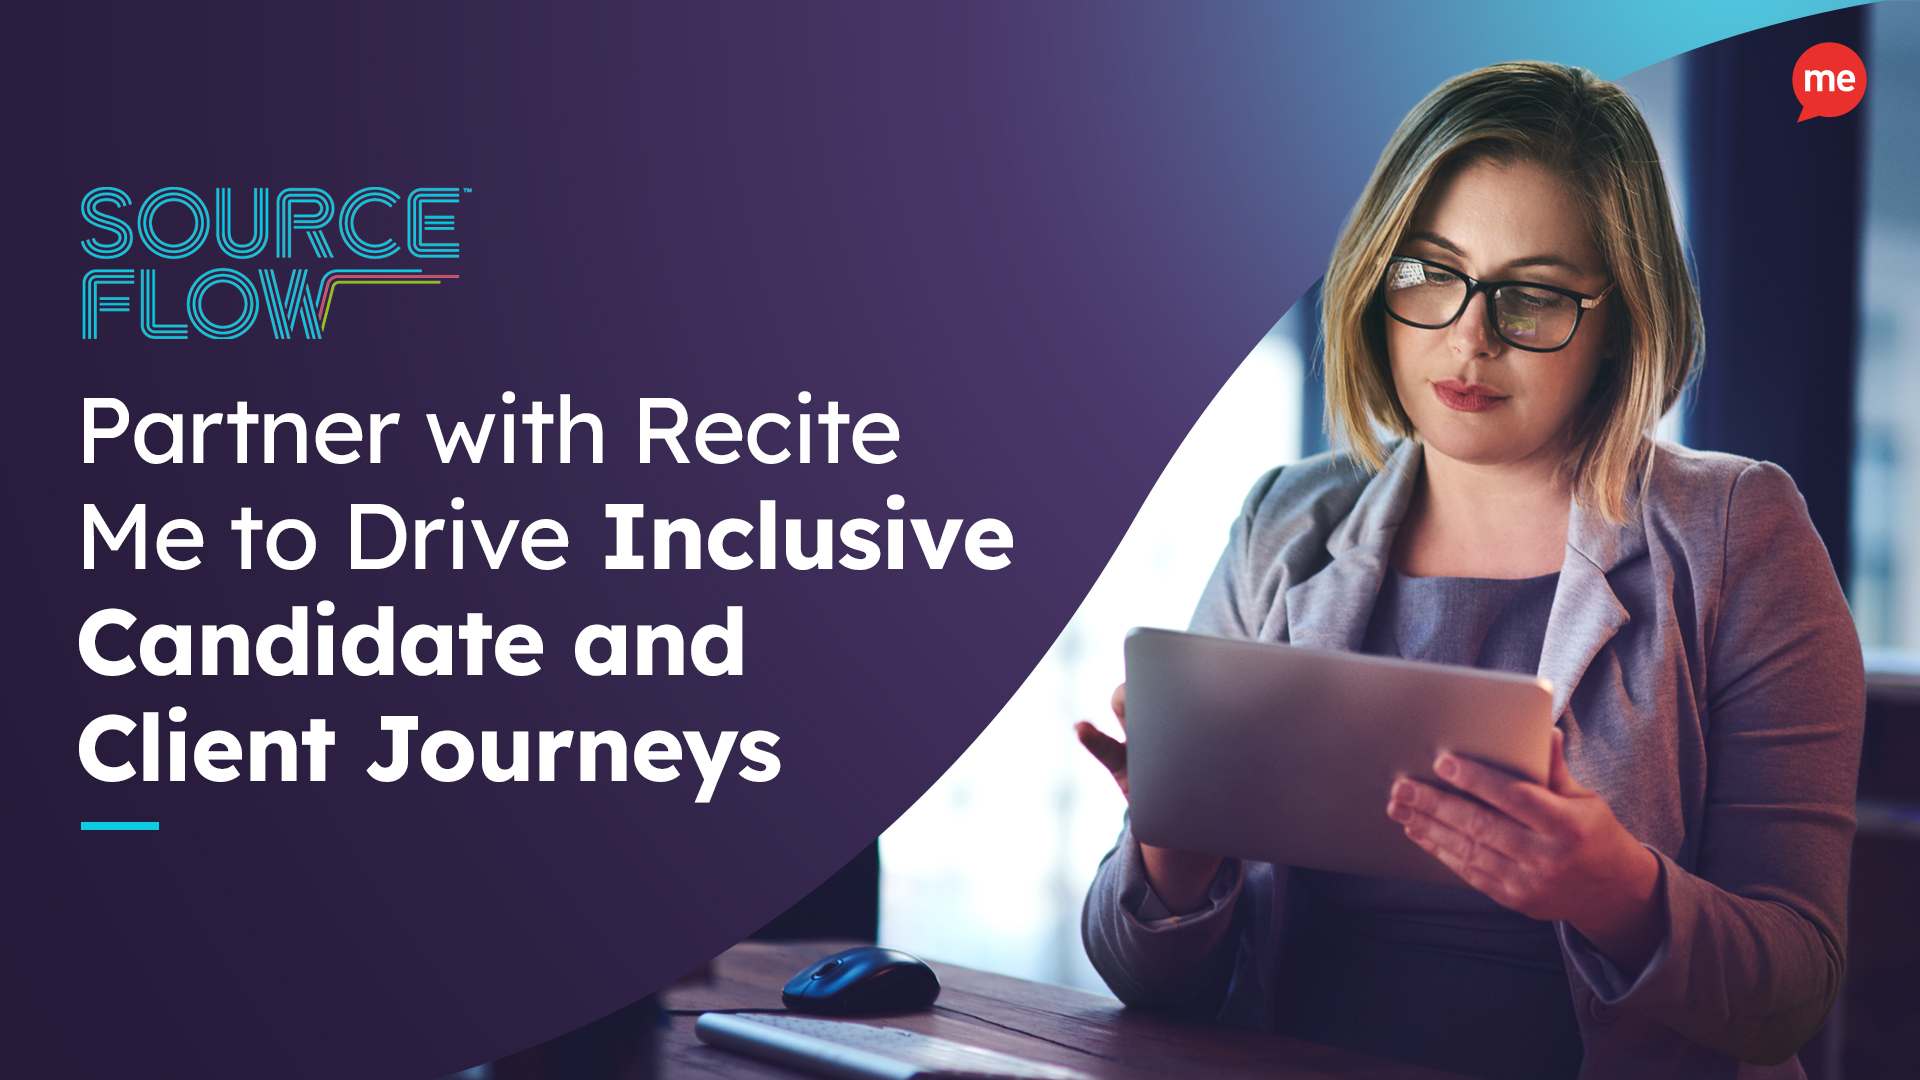 SourceFlow Partner with Recite Me to Drive Inclusive Candidate and Client Journeys